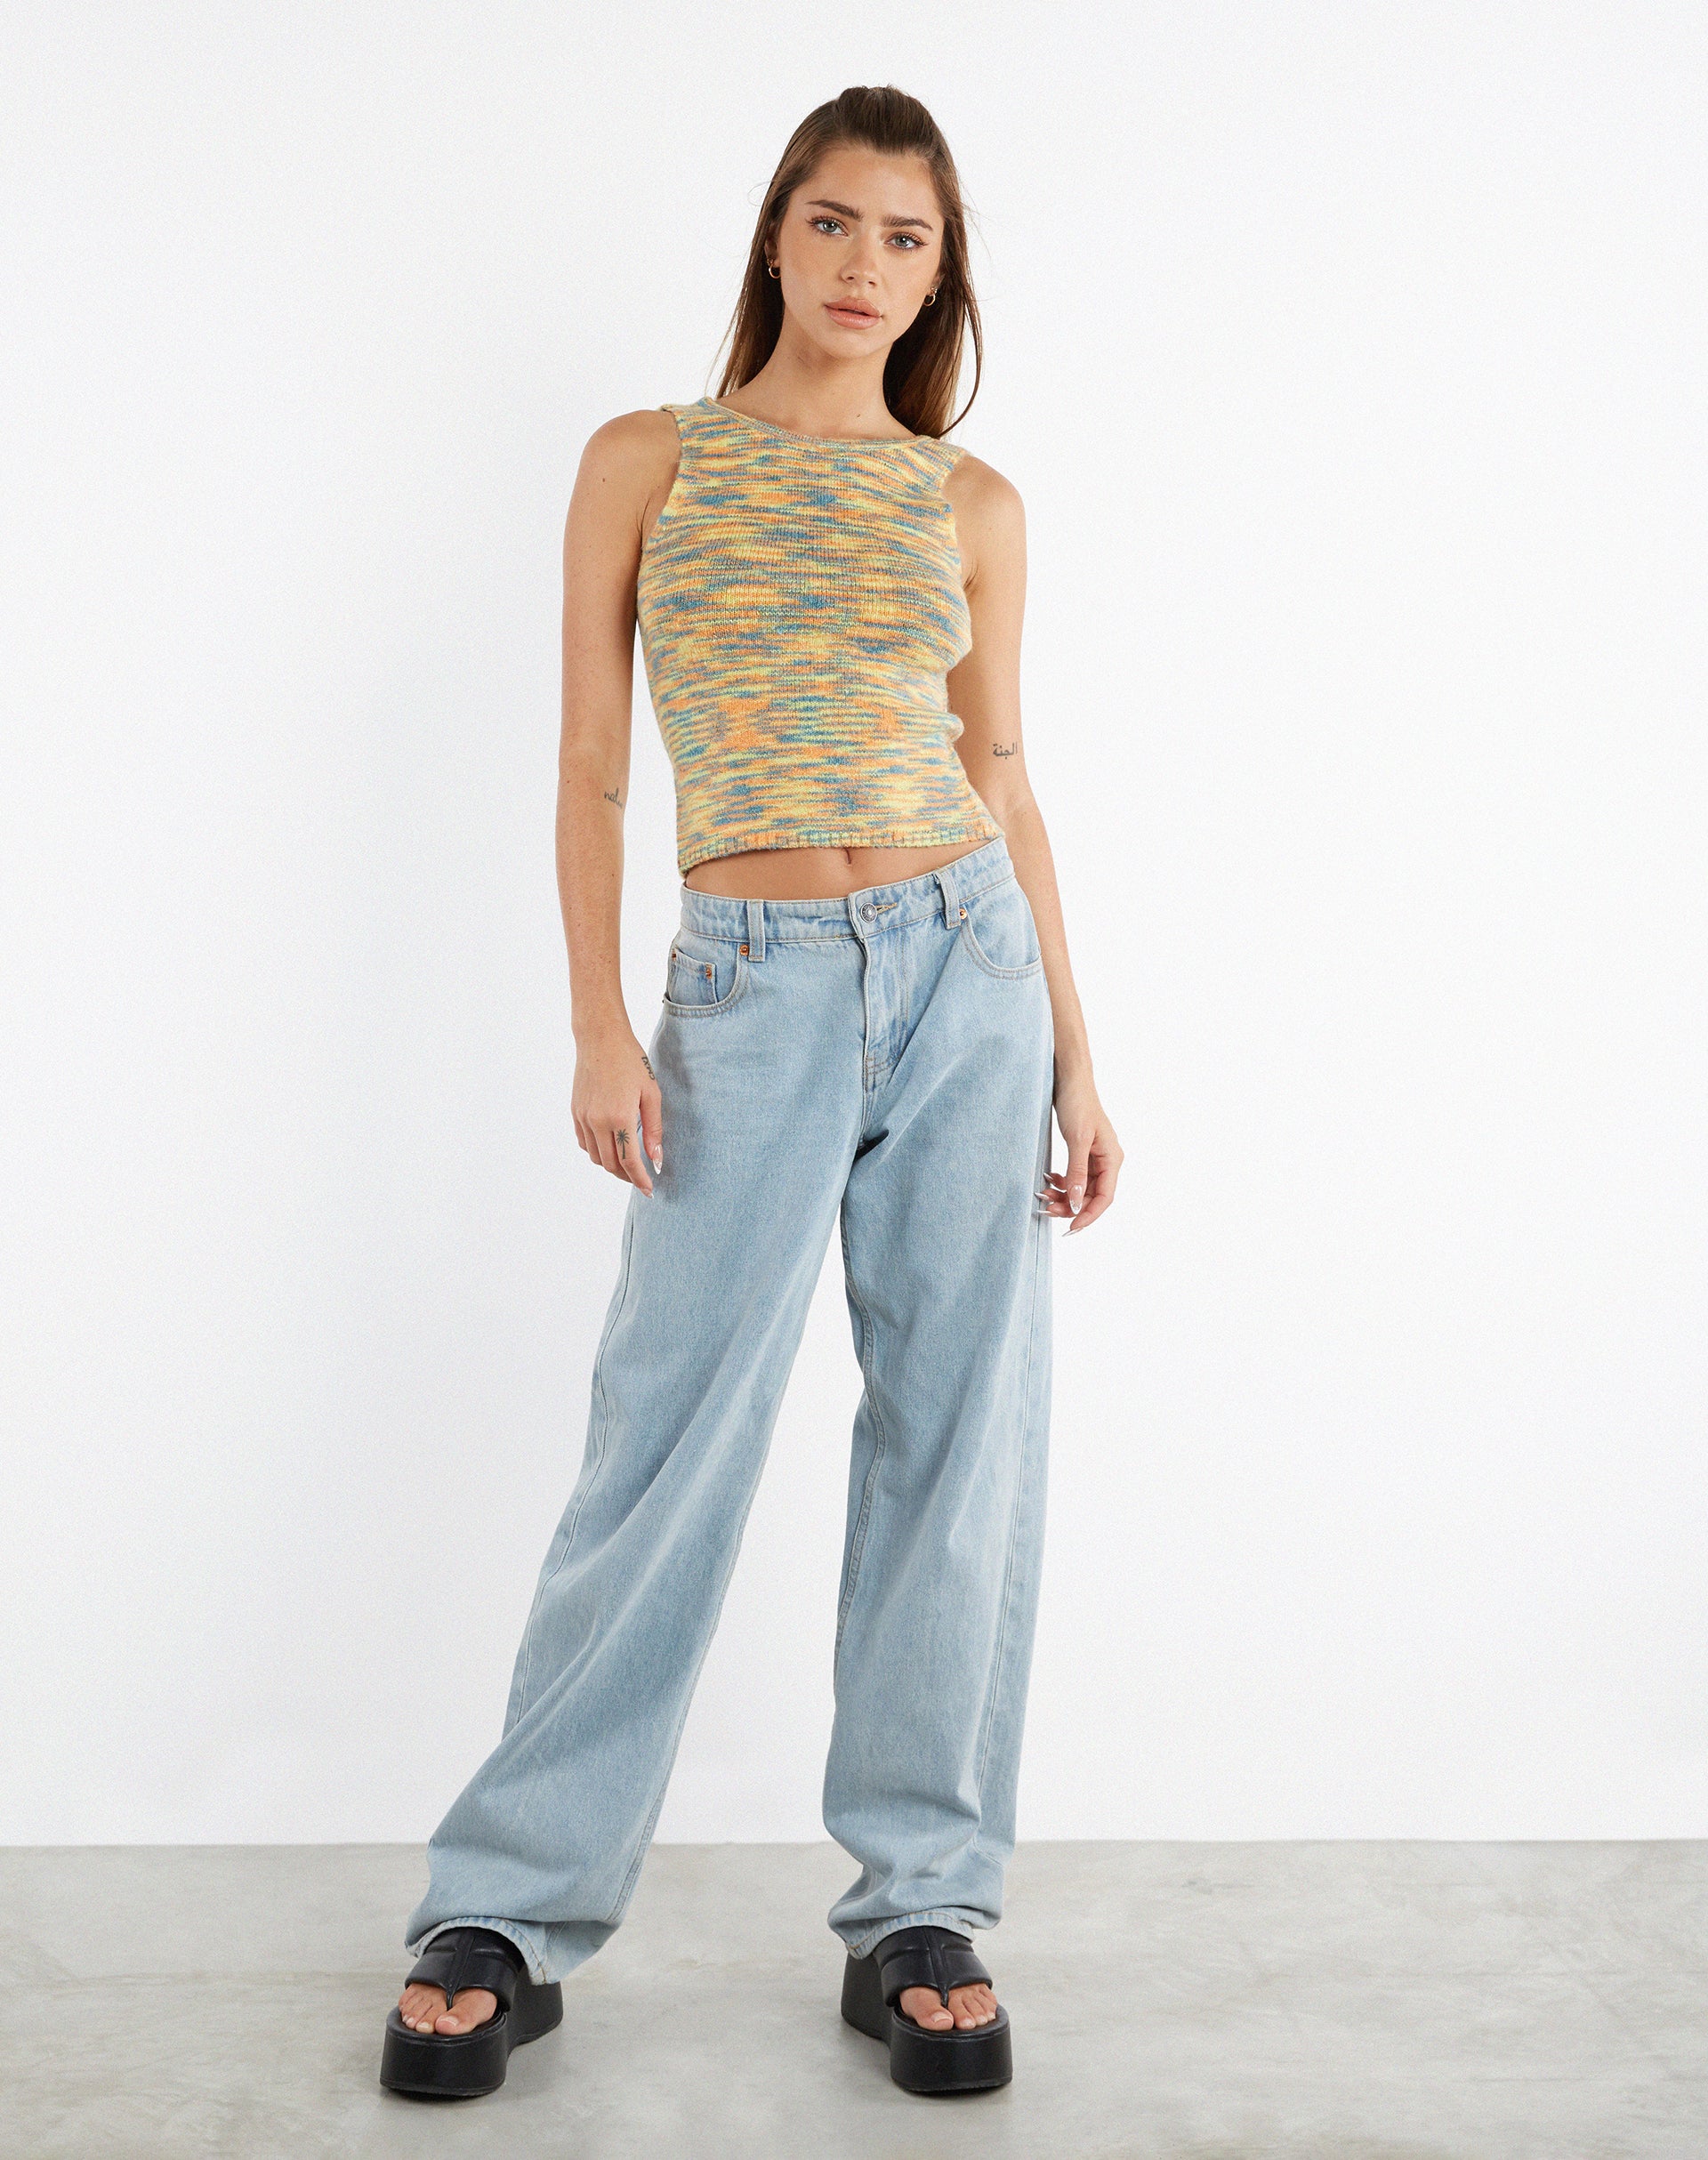 Image of MOTEL X JACQUIE Kinda Crop Top in Mix Space Dye Multi Colour